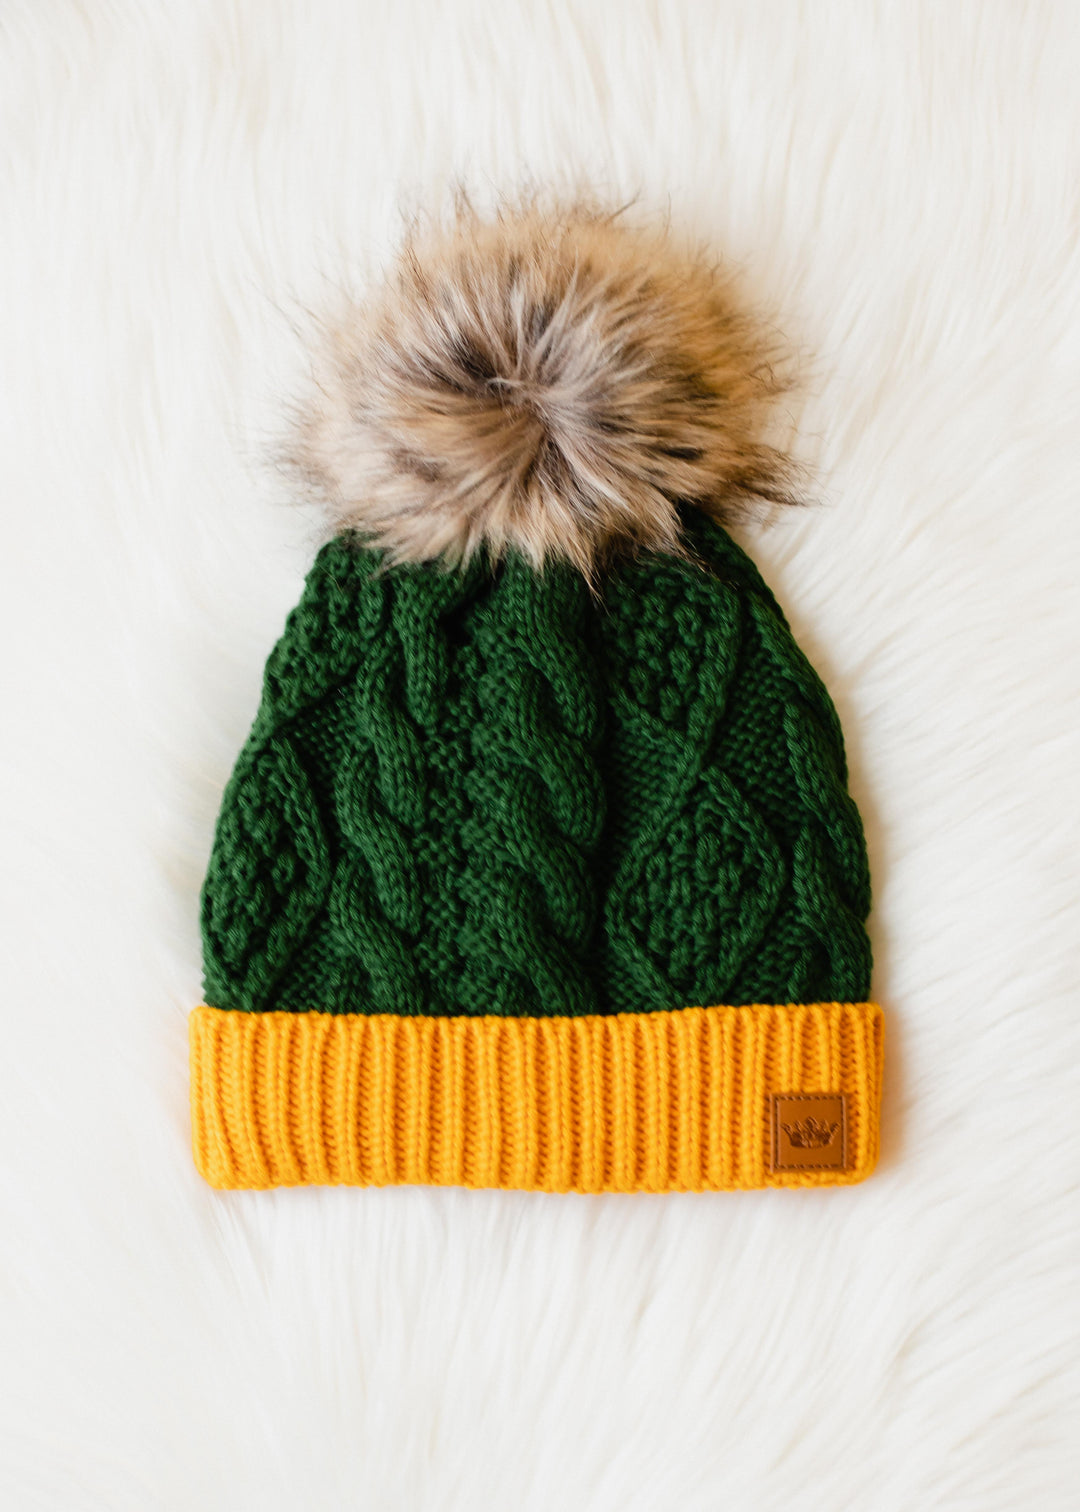 Panache Green and Gold Cable Knit Merrick Beanie